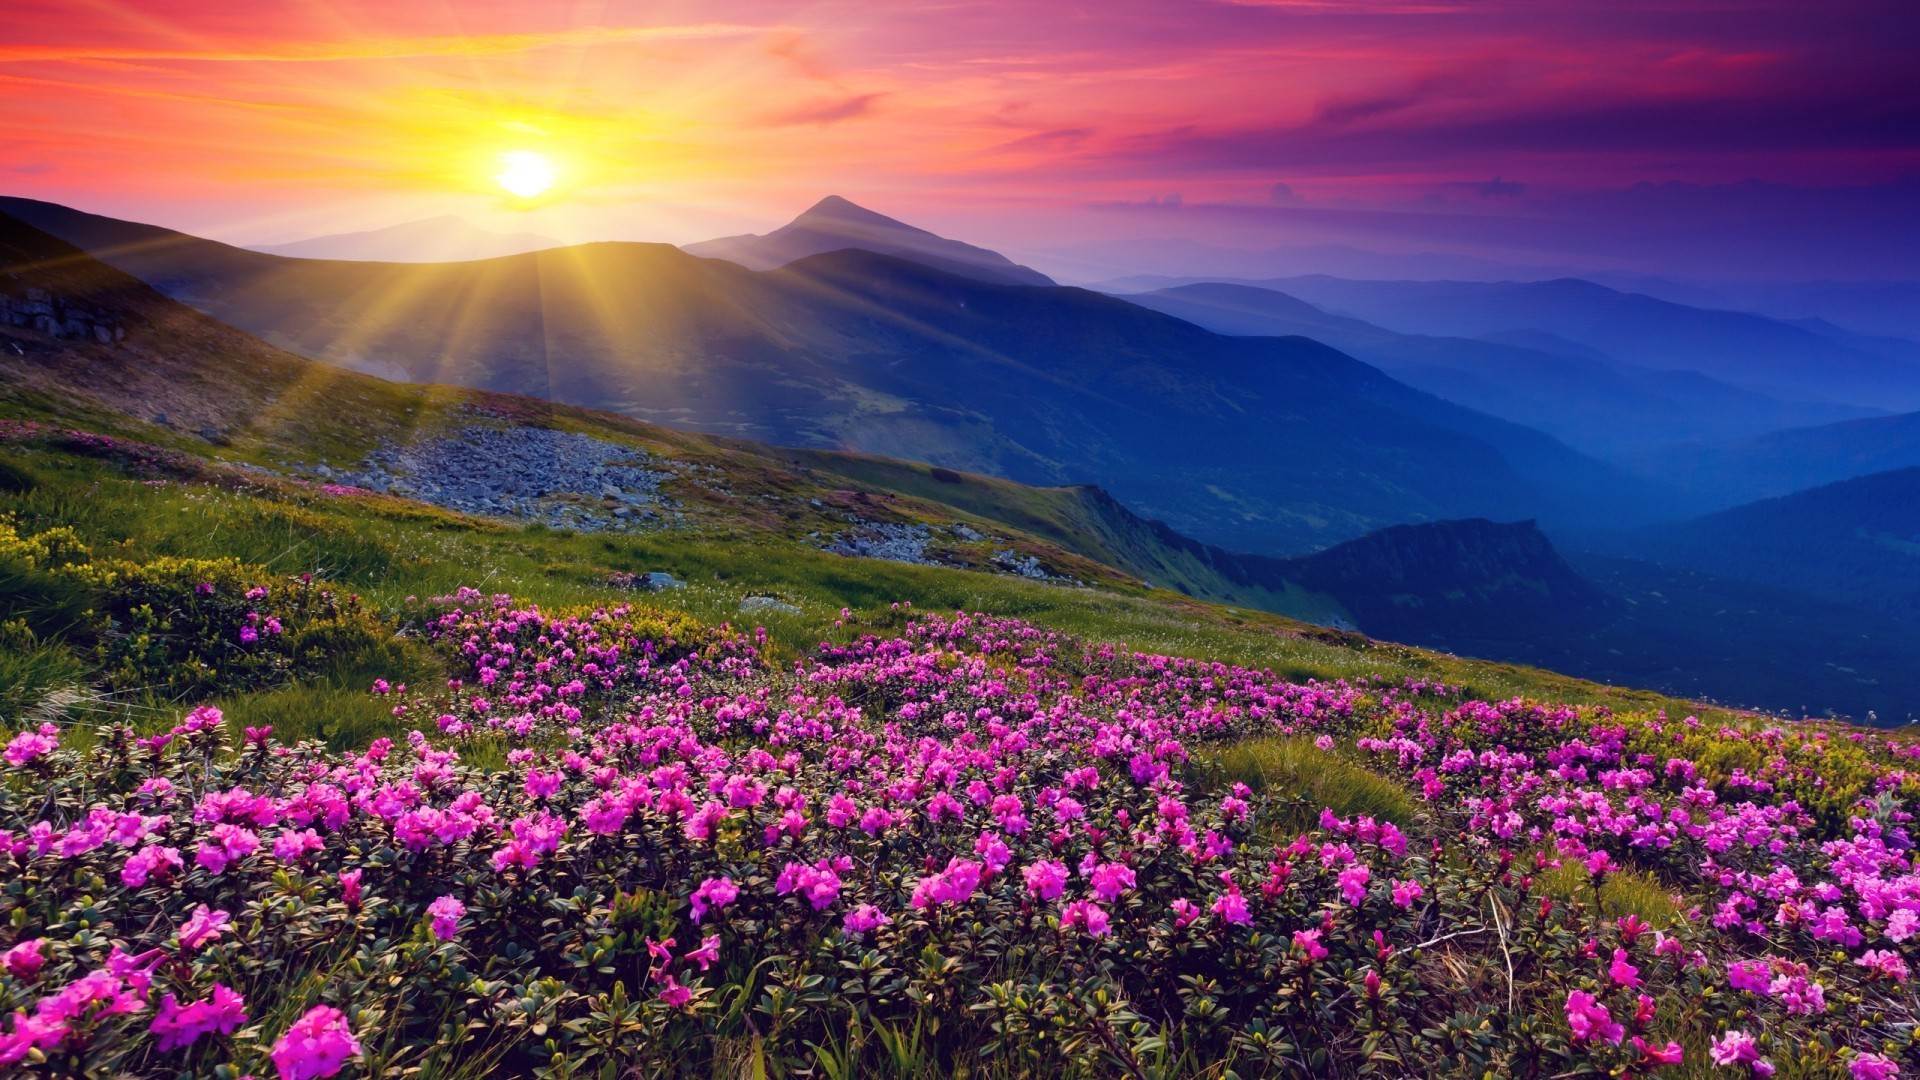 1920x1080 Awesome Wild Flowers About Wild Flowers Wallpaper